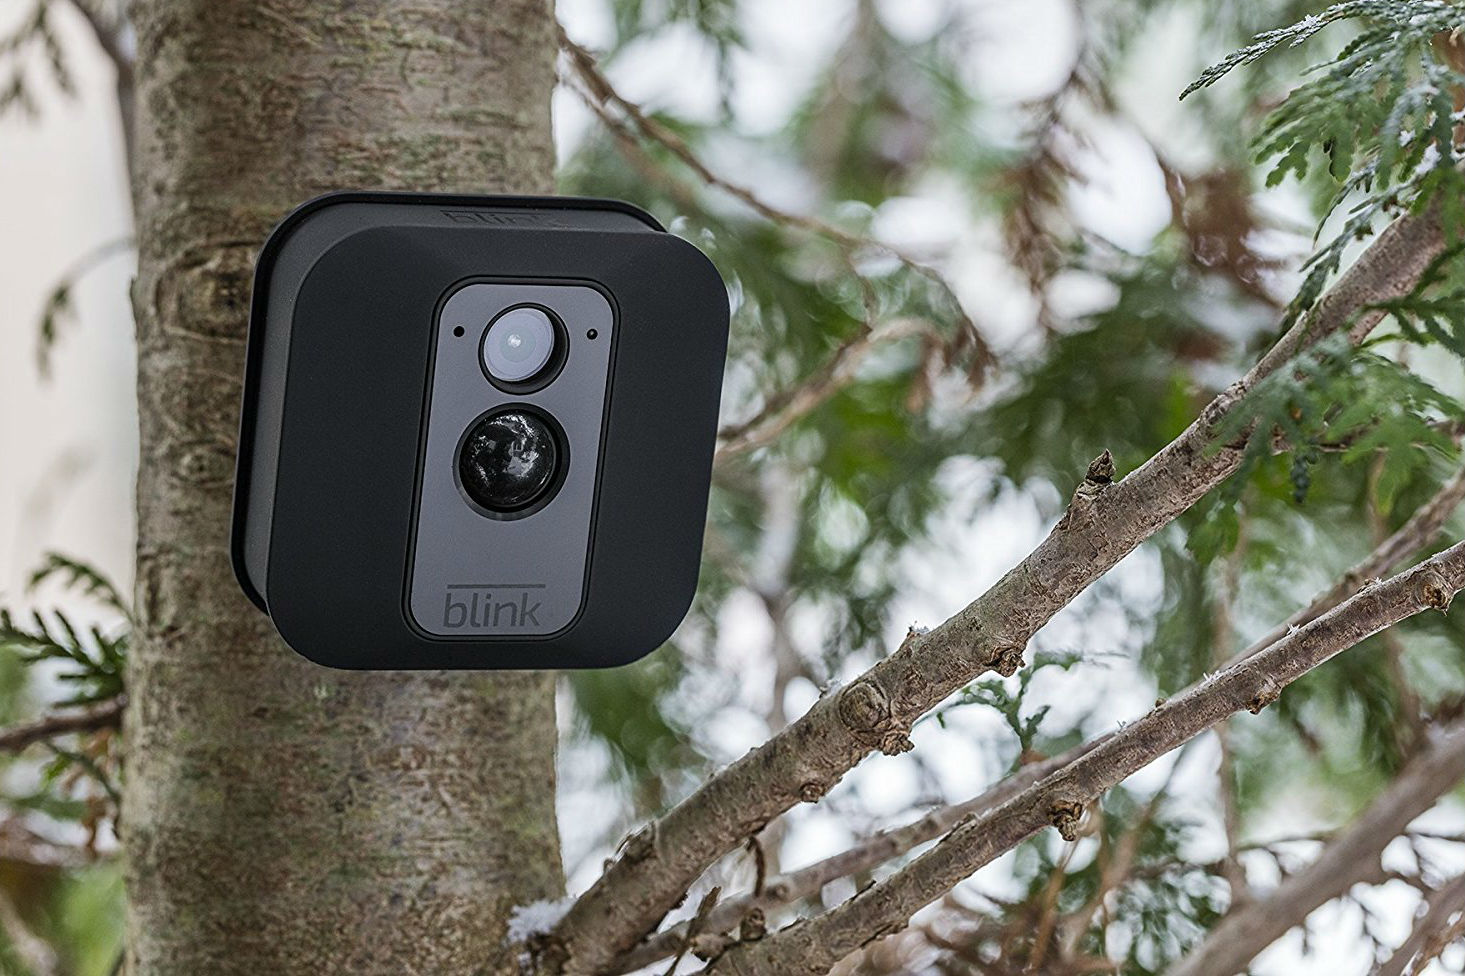 How To Troubleshoot Common Issues With Blink Security Cameras